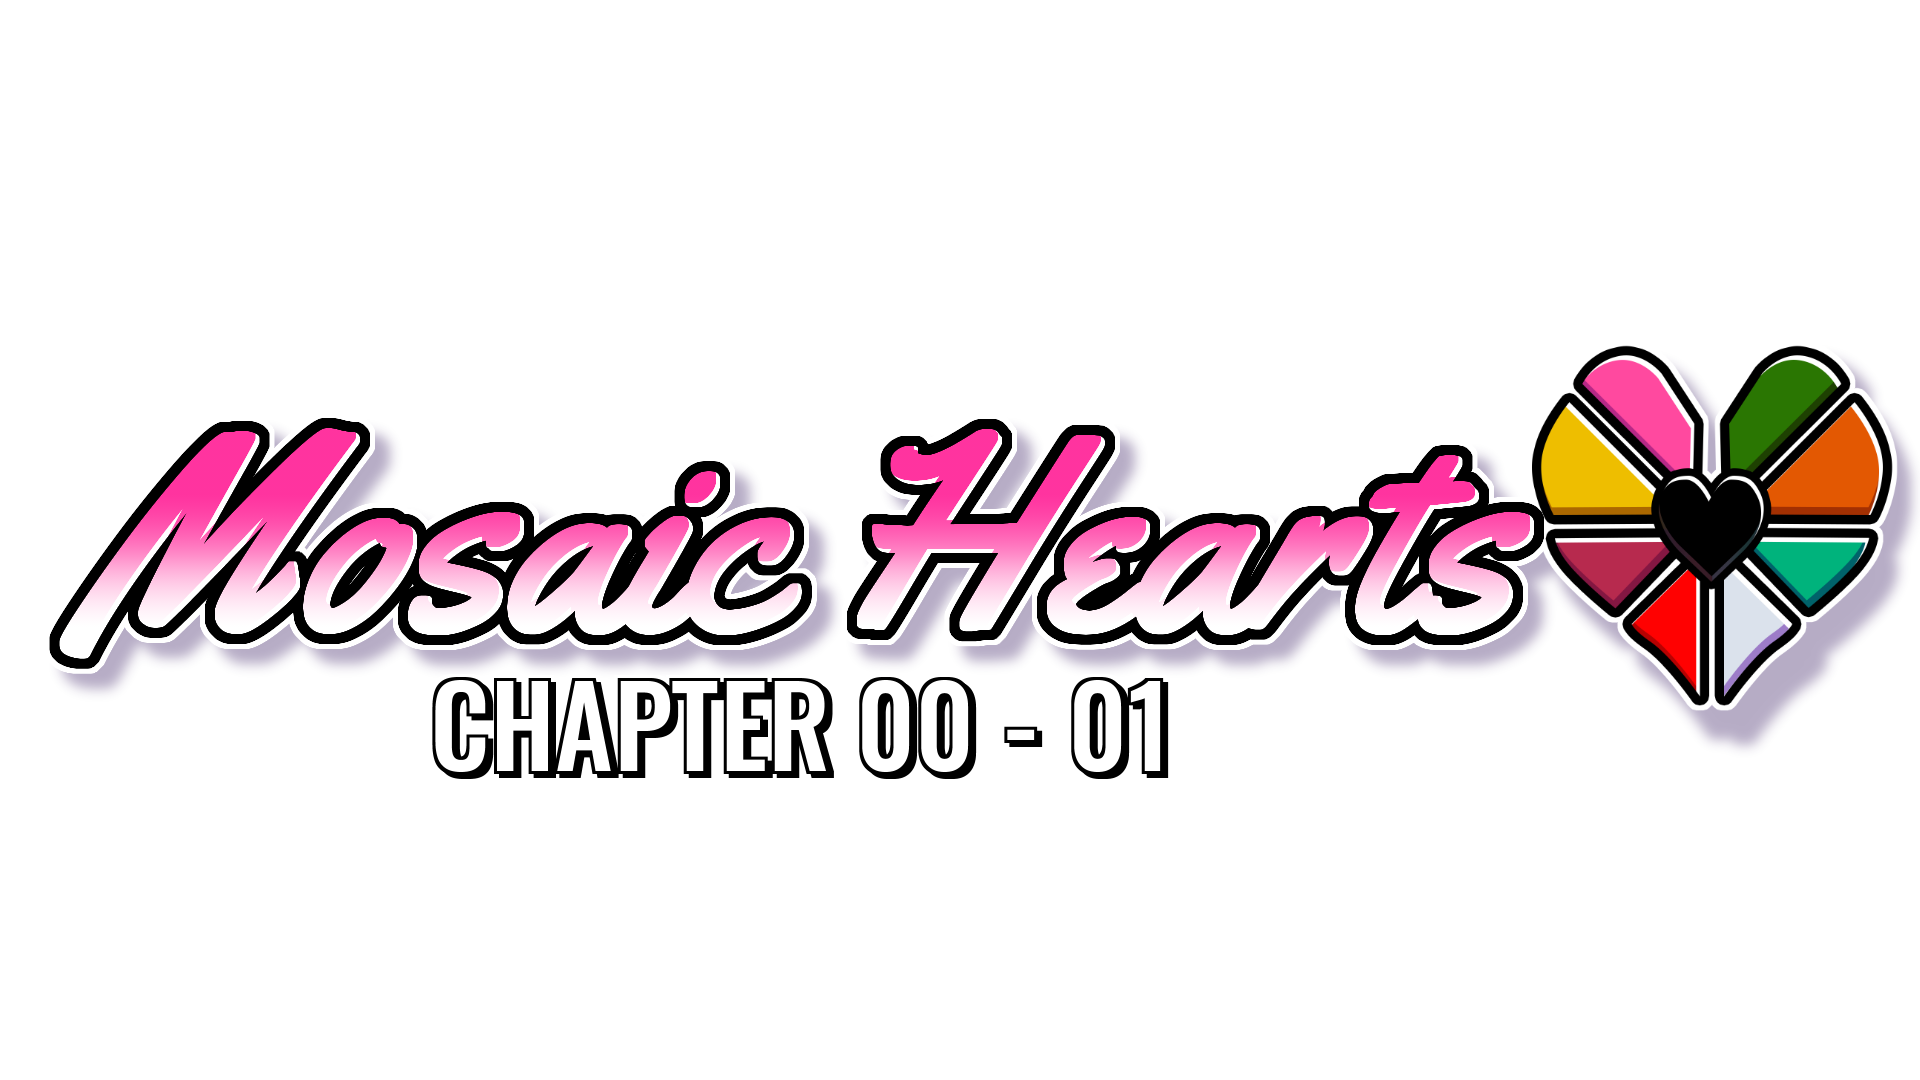 Mosaic Hearts Preview Chapter 00 - 01